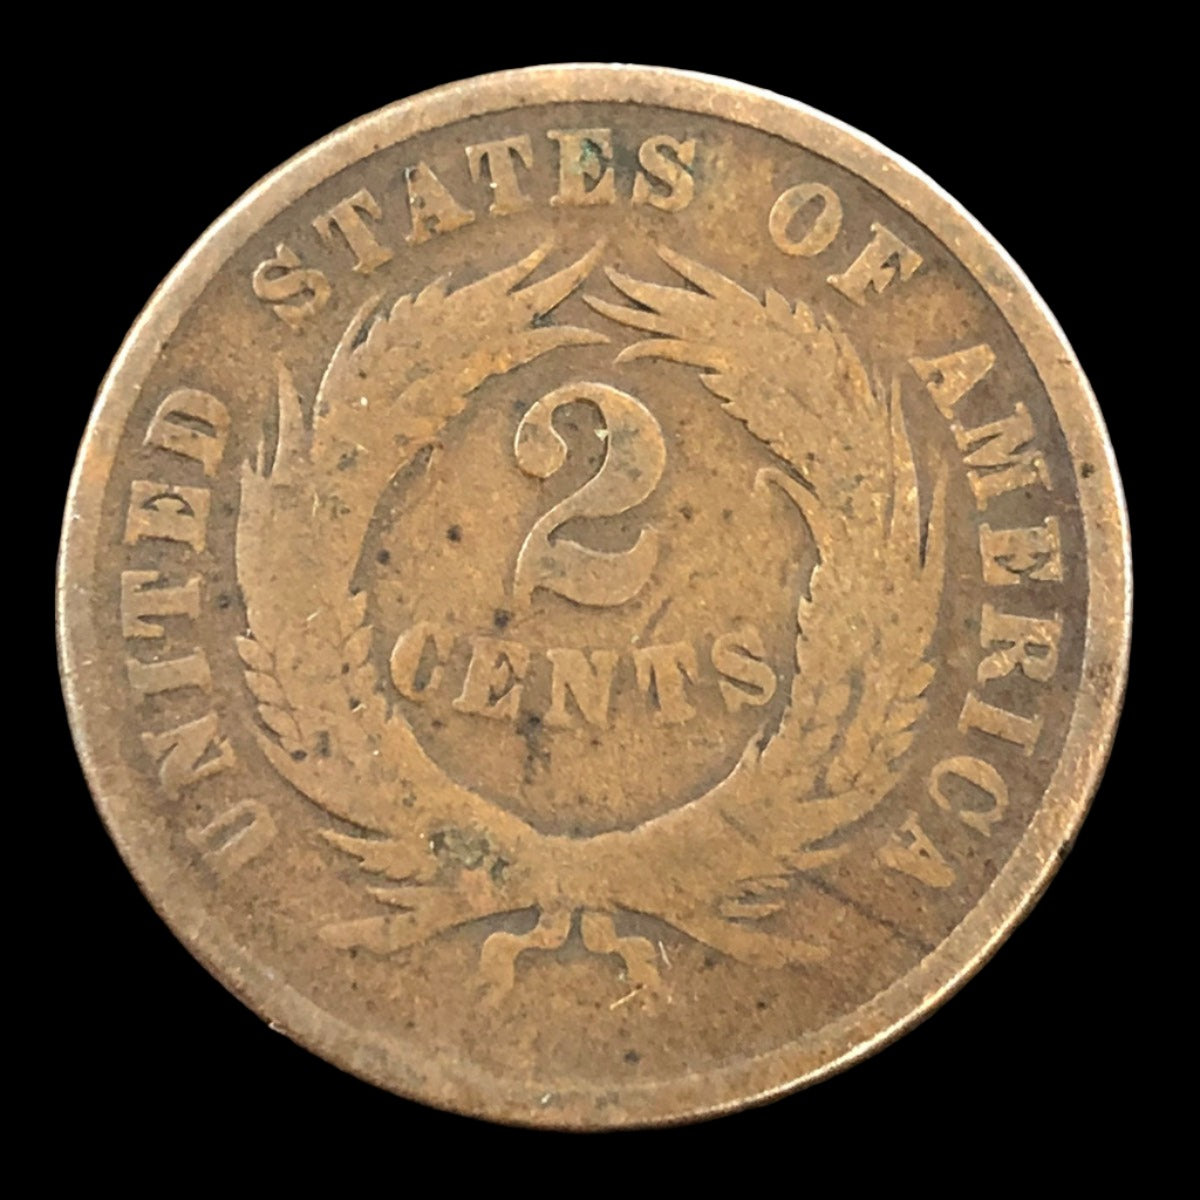 1865 Two Cent Piece (G)